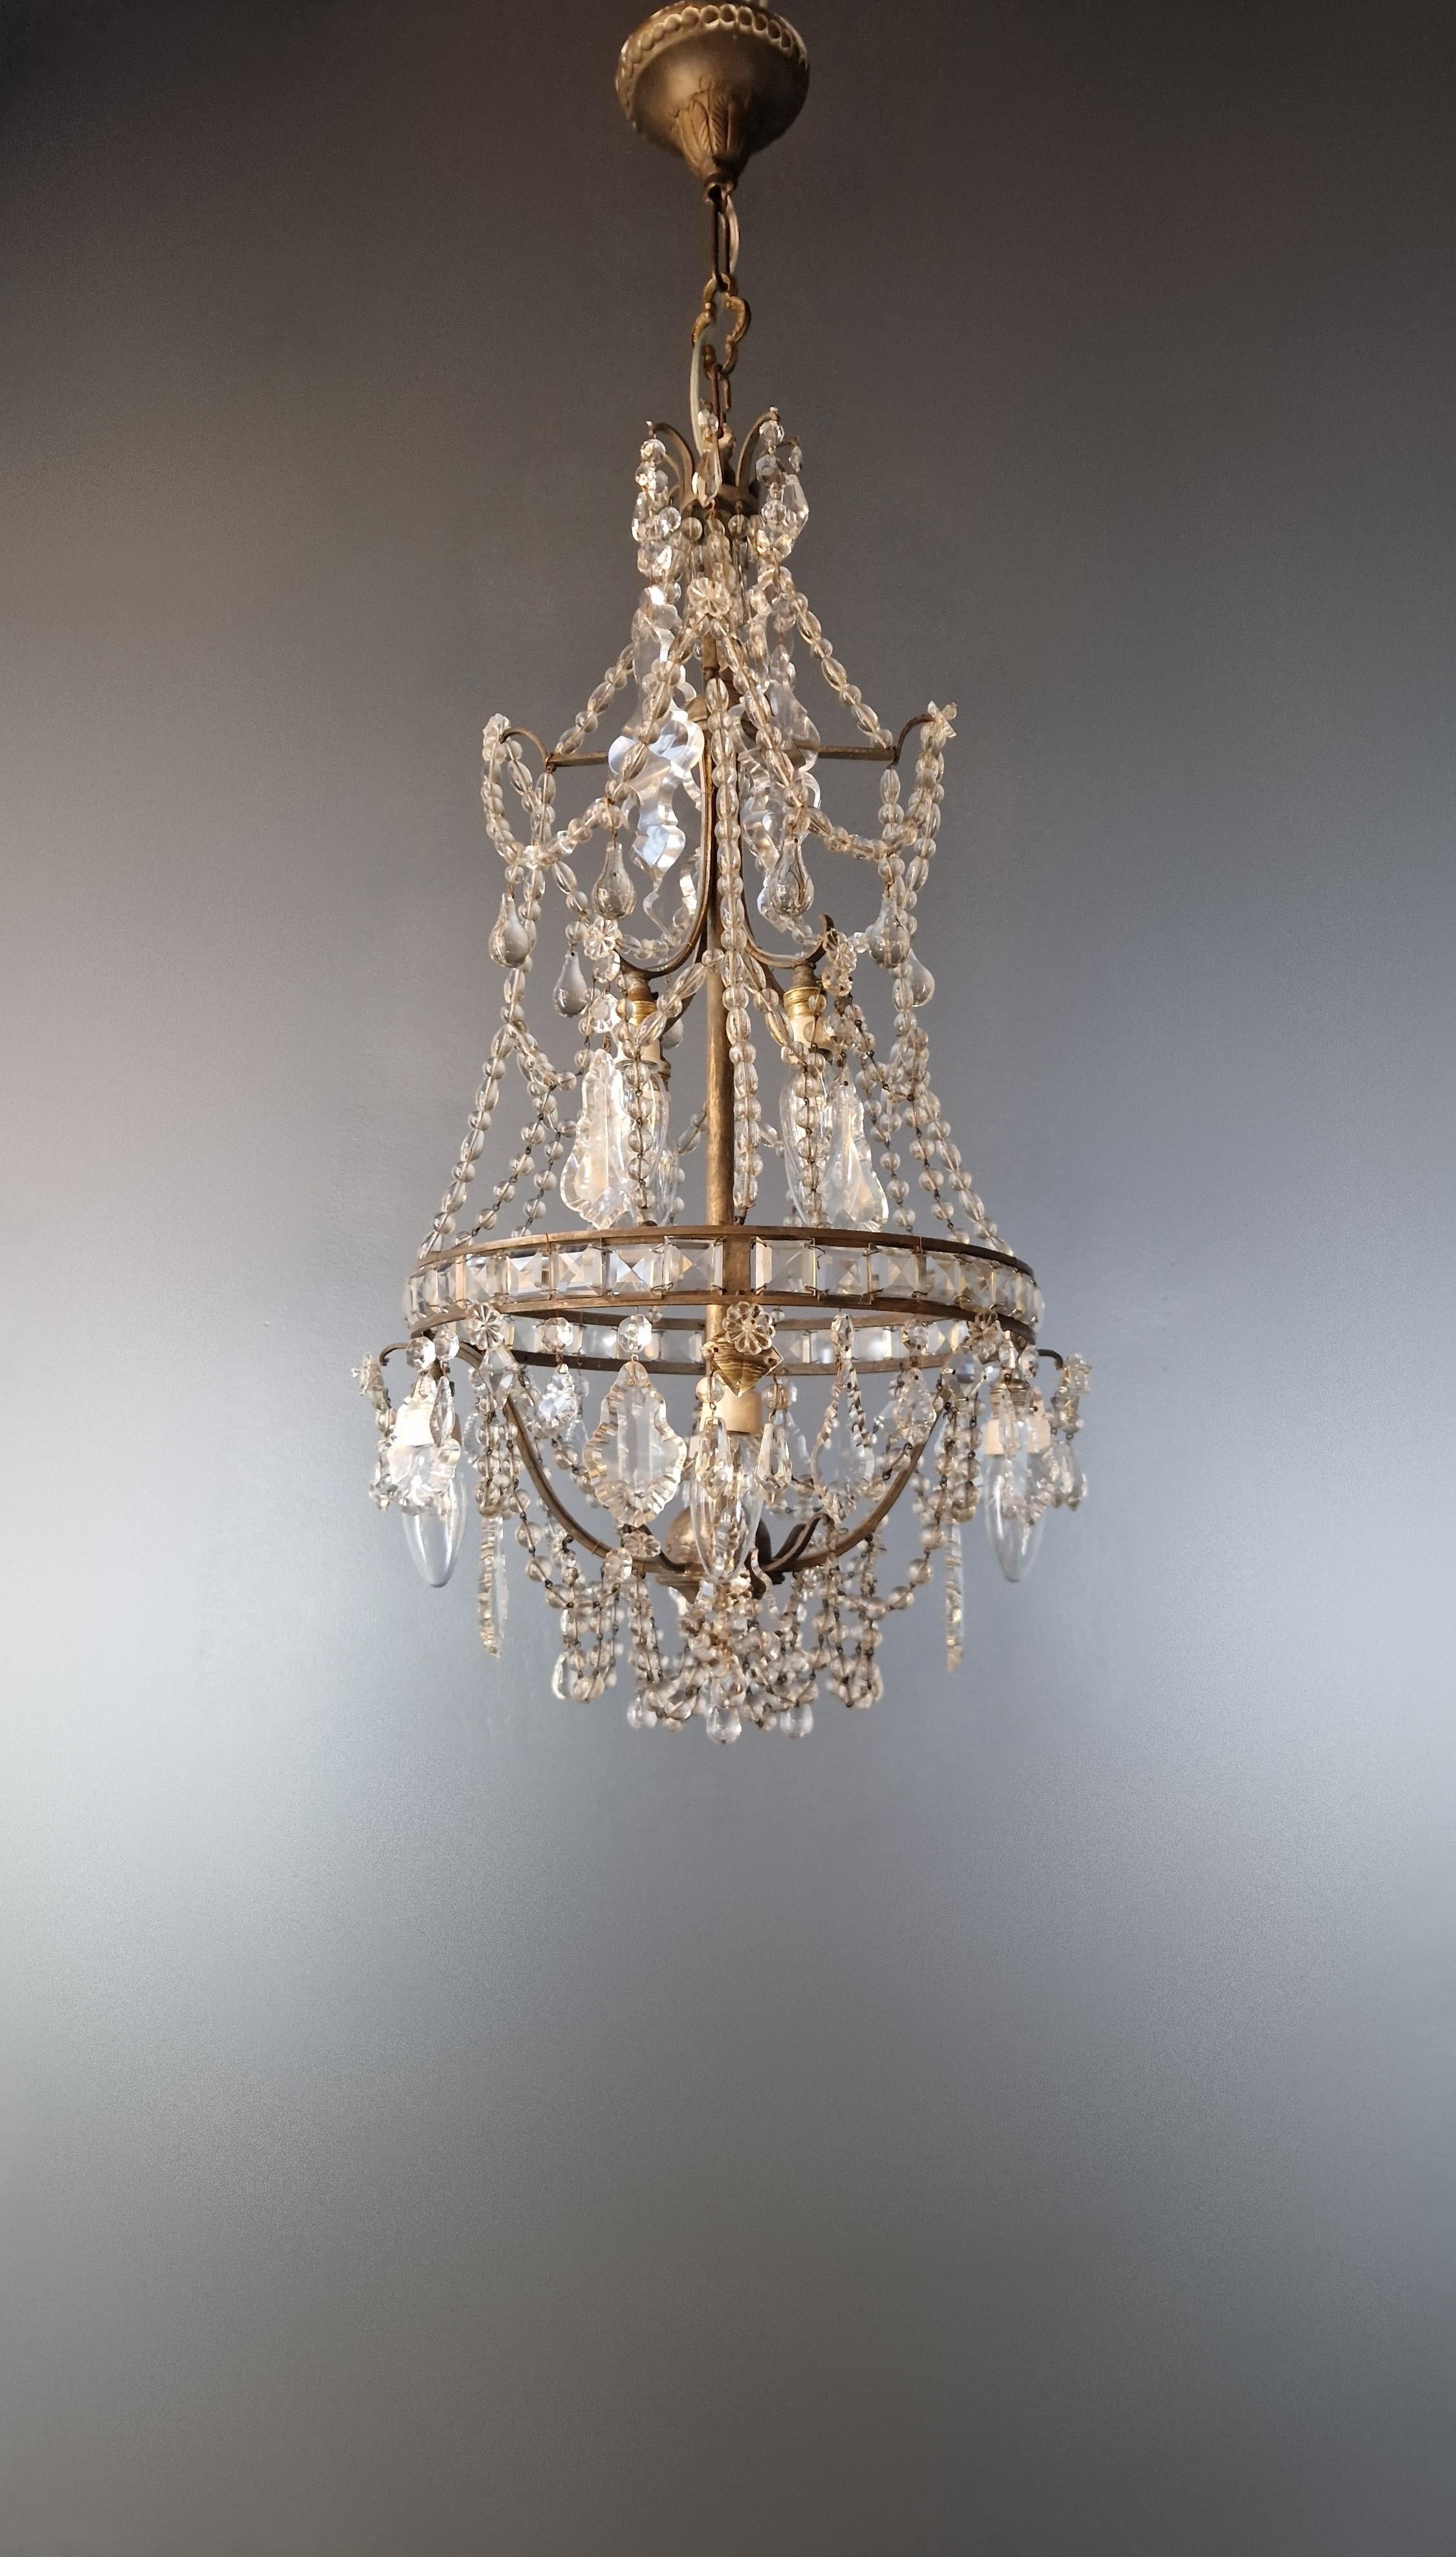 Hand-Knotted Lustre A Cage Antique Art Nouveau Brass Ceiling Crystal Chandelier For Sale